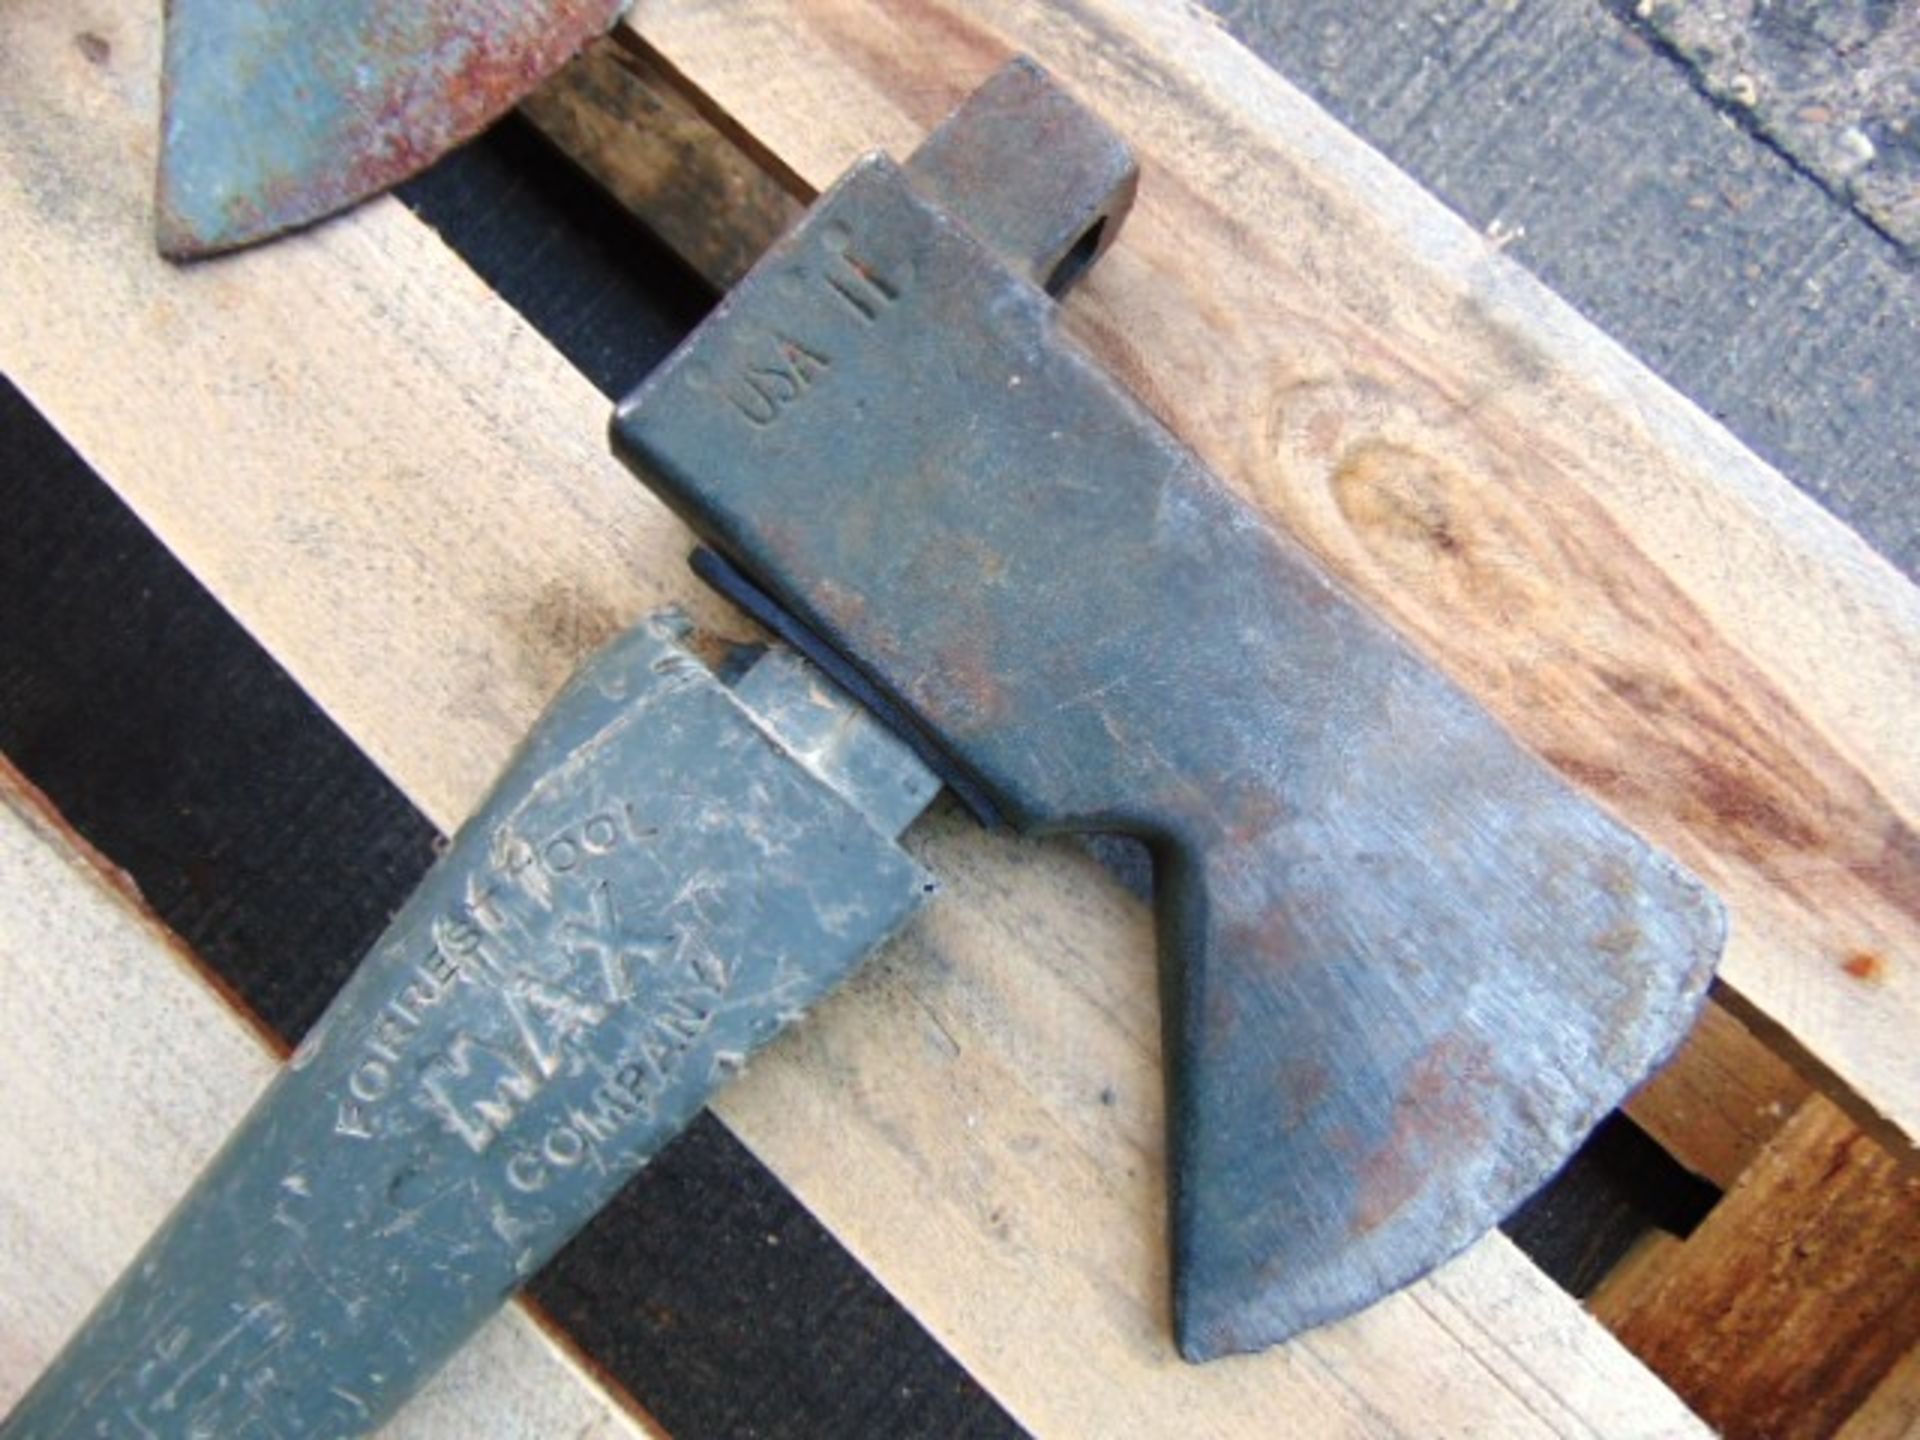 4 x Forrest Tool Max Axes - Image 2 of 6